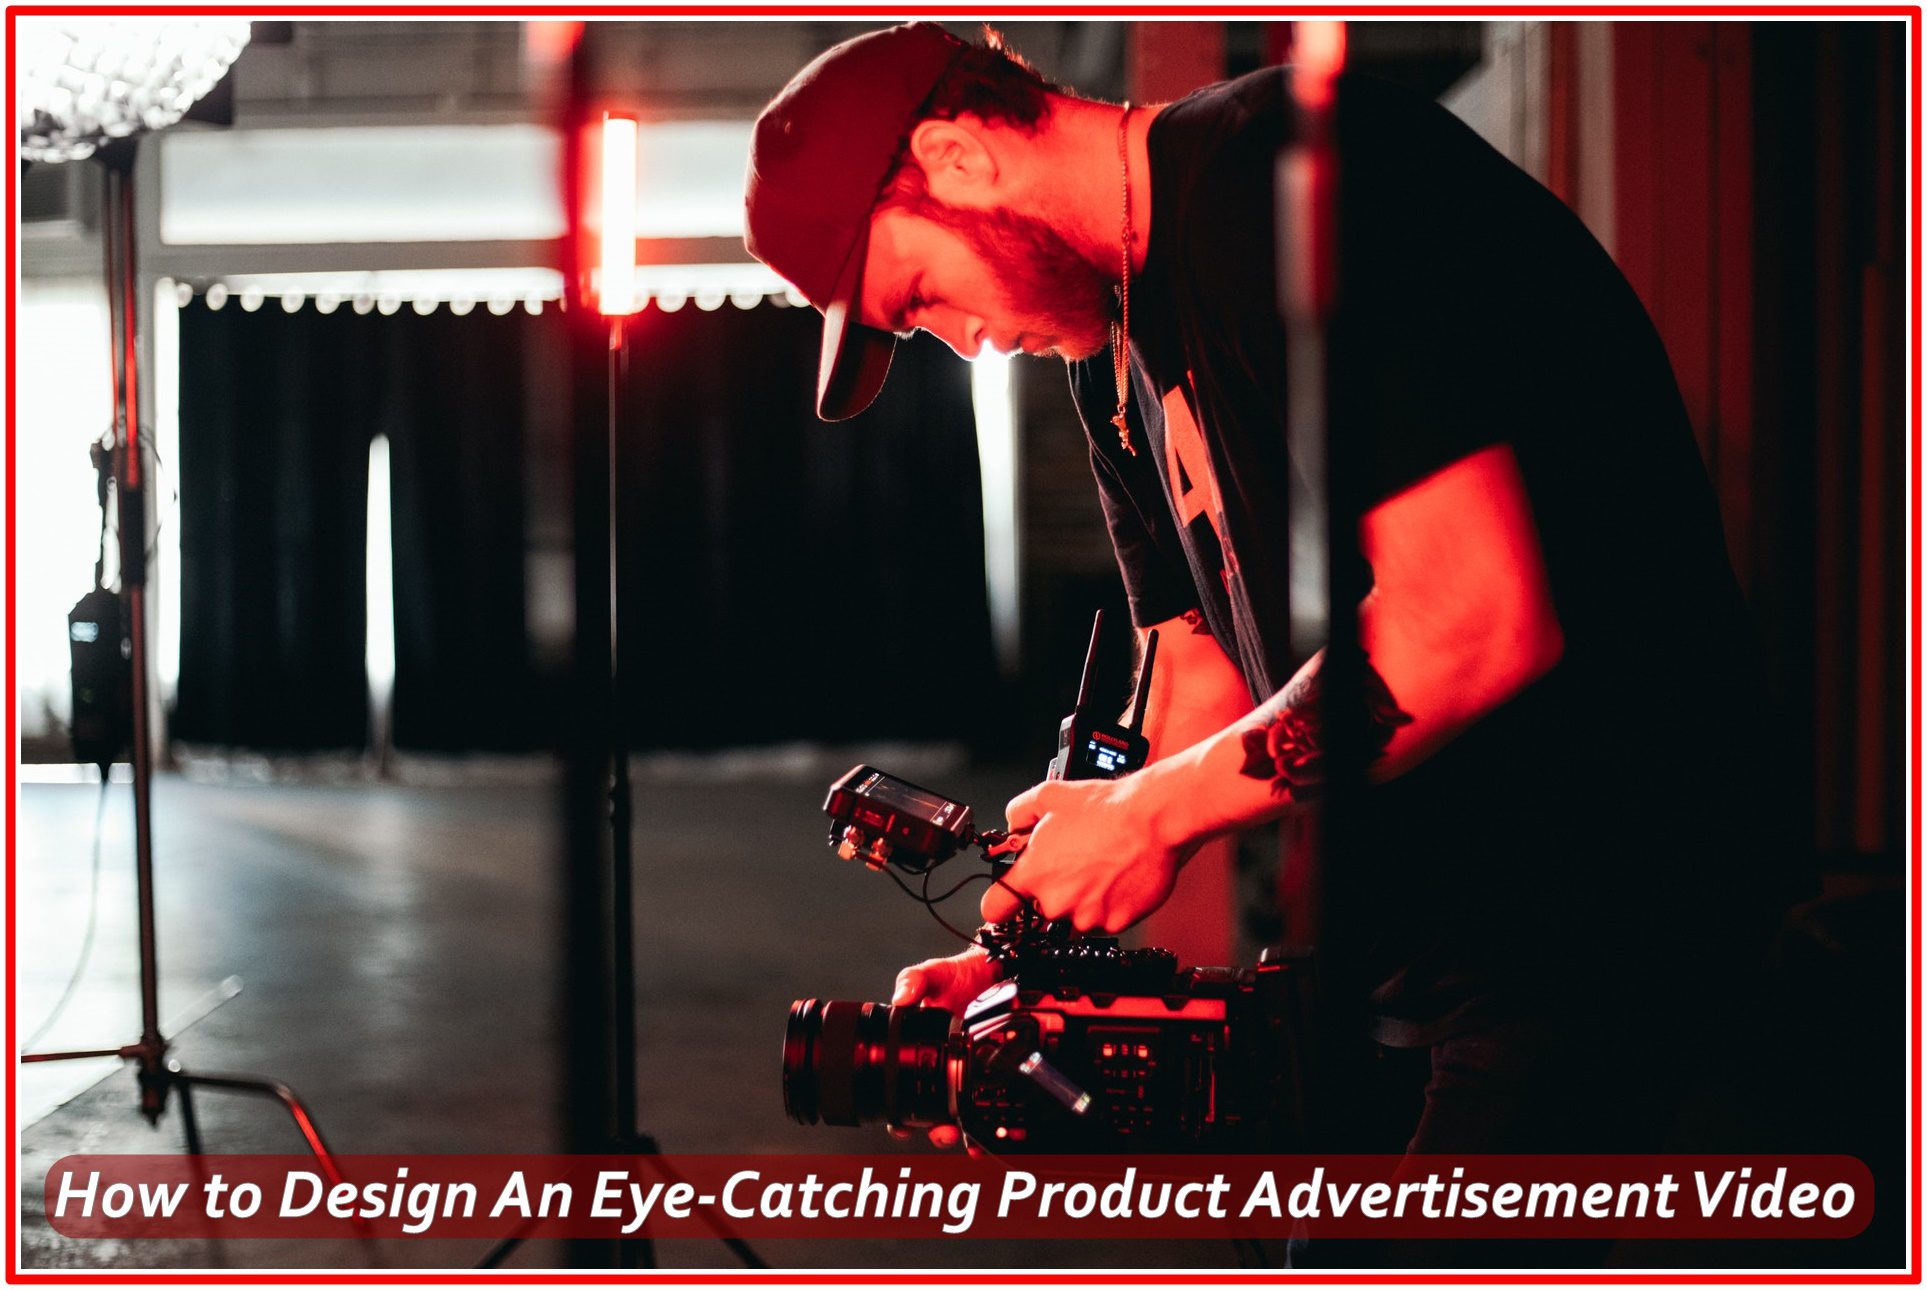 How to Design An Eye-Catching Product Advertisement Video